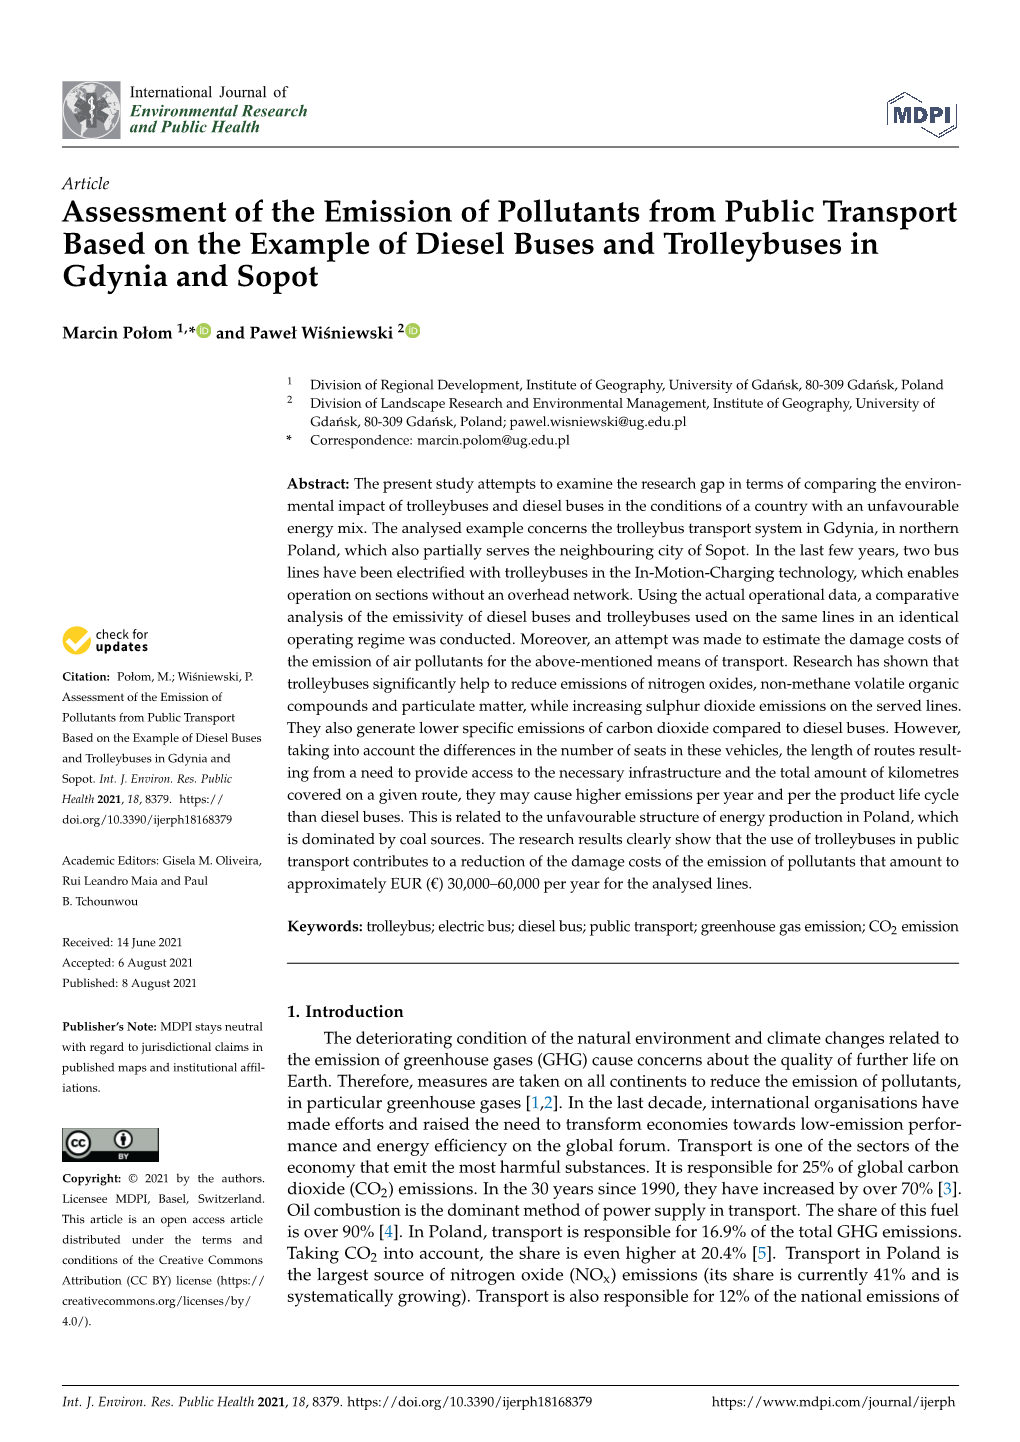 Assessment of the Emission of Pollutants from Public Transport Based on the Example of Diesel Buses and Trolleybuses in Gdynia and Sopot